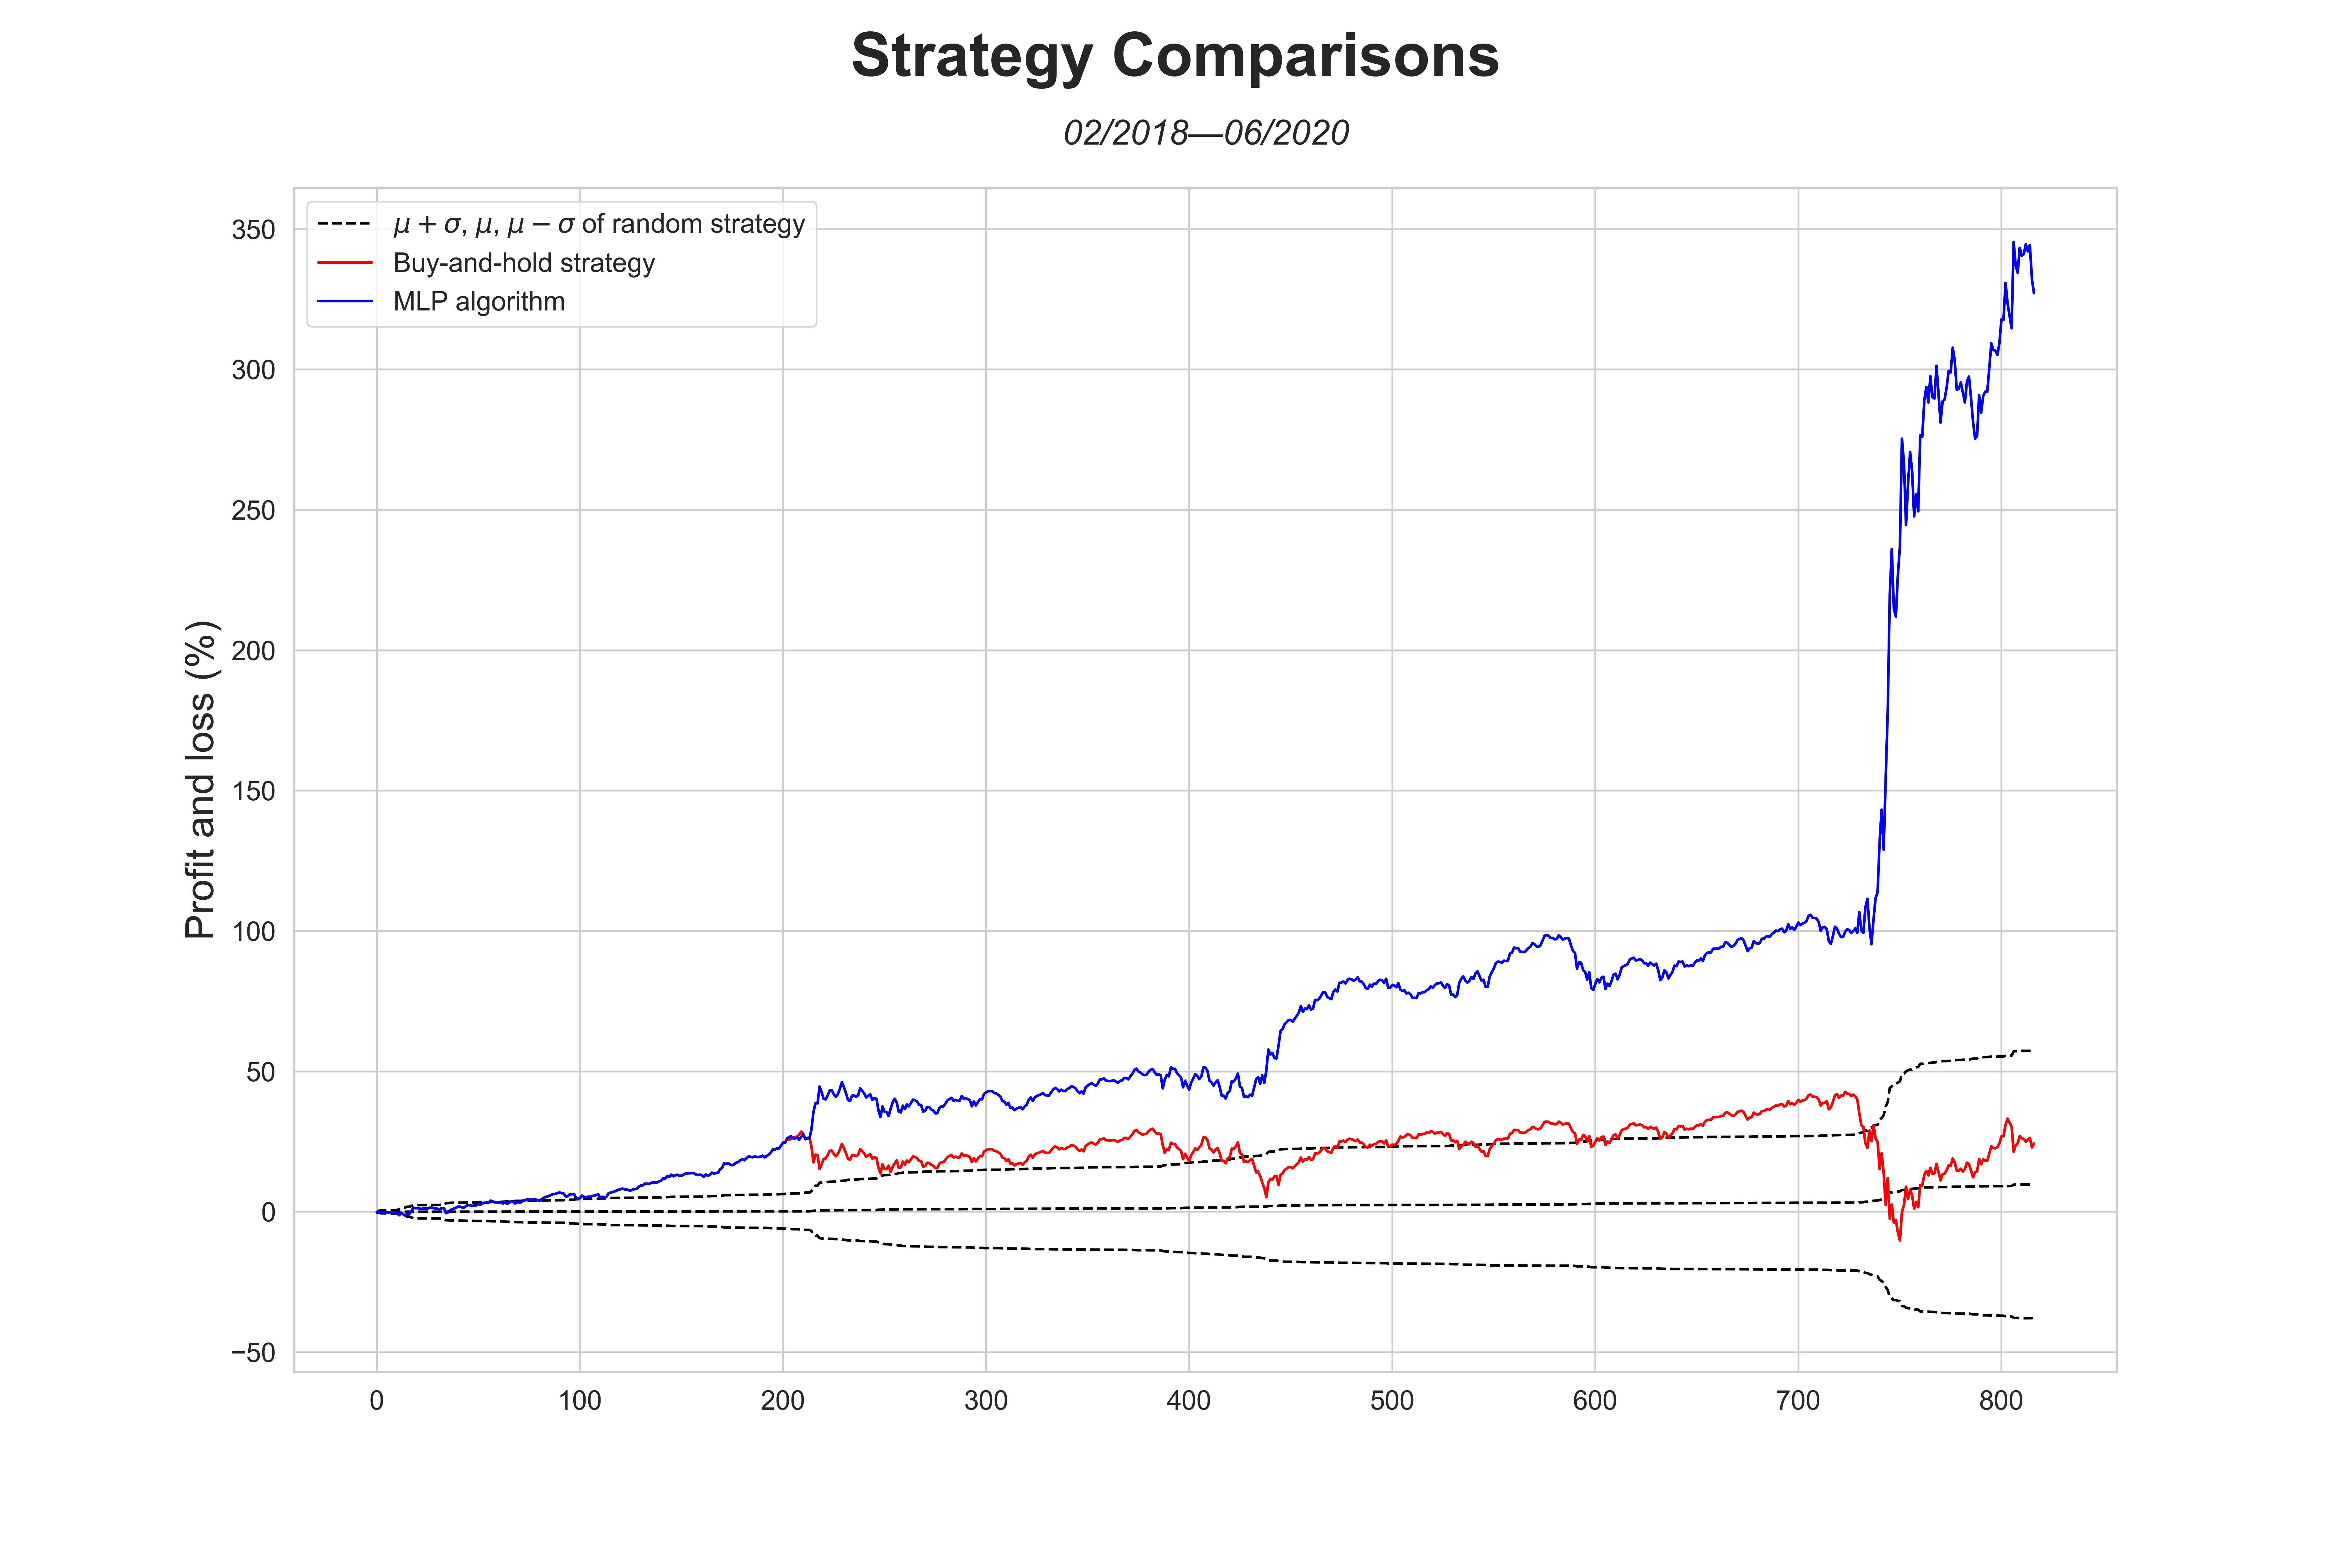 Comparison of the MLPClassifier, 10.000 random and a buy-and-hold strategy